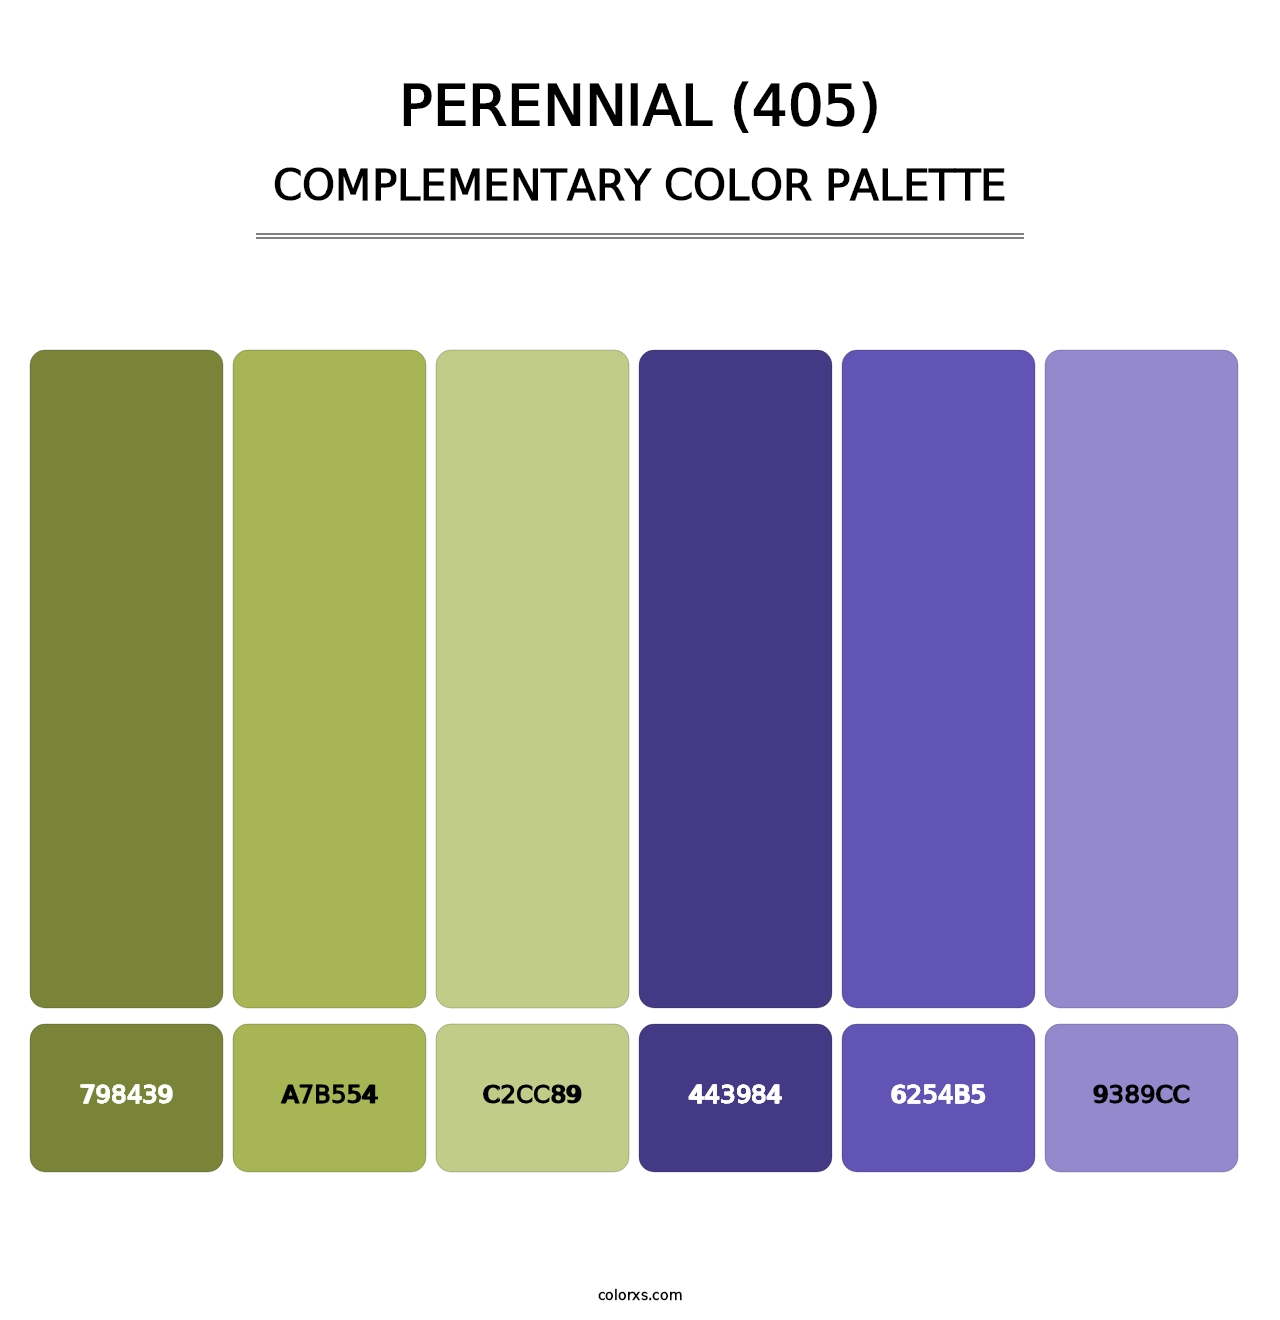 Perennial (405) - Complementary Color Palette